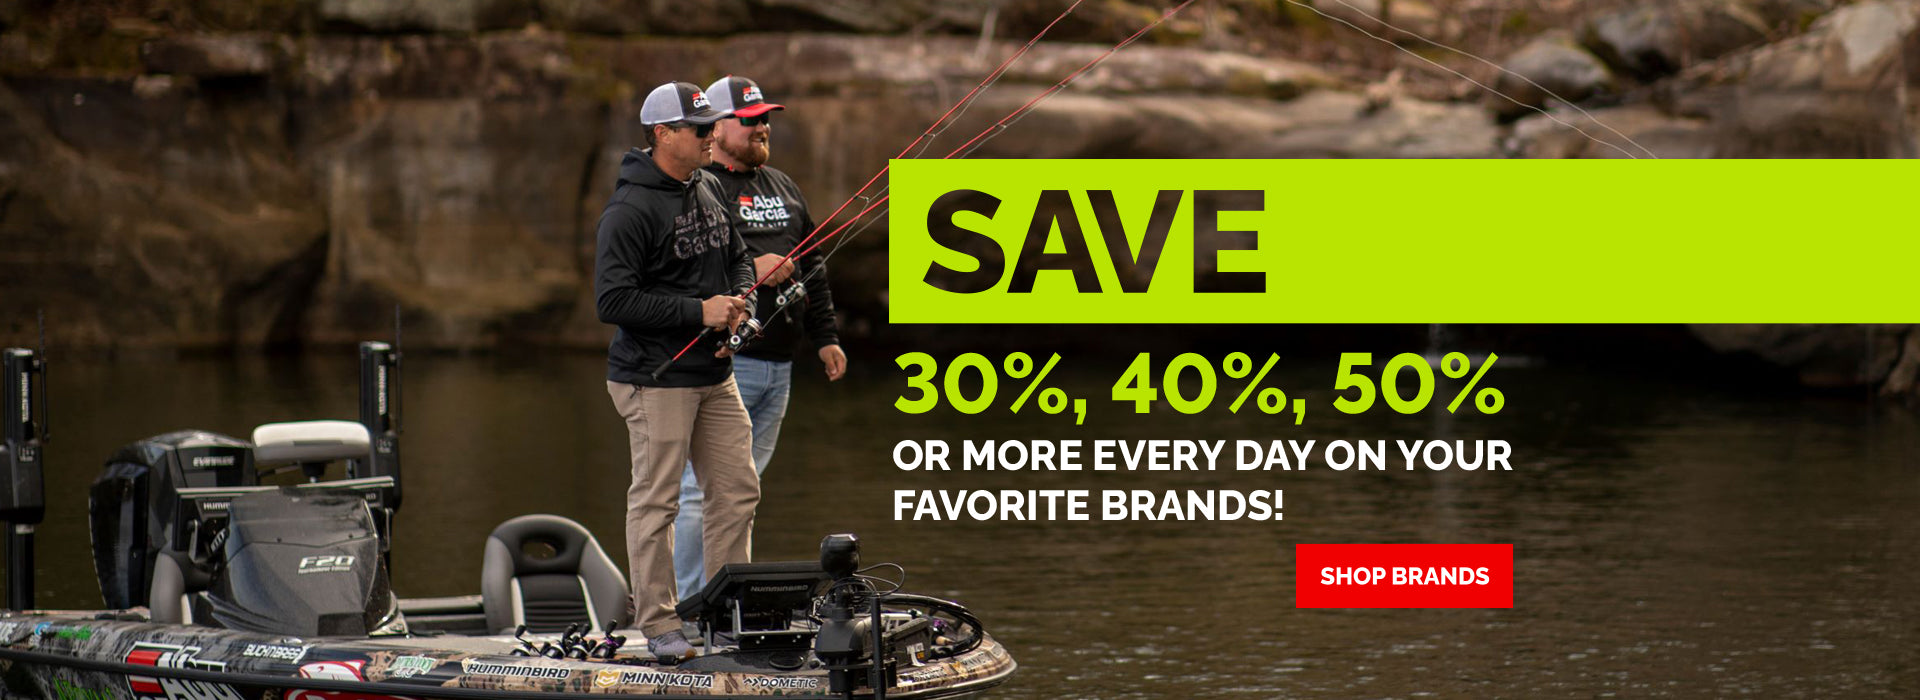 Fishing Gear & Tackle - Up to 30% Off